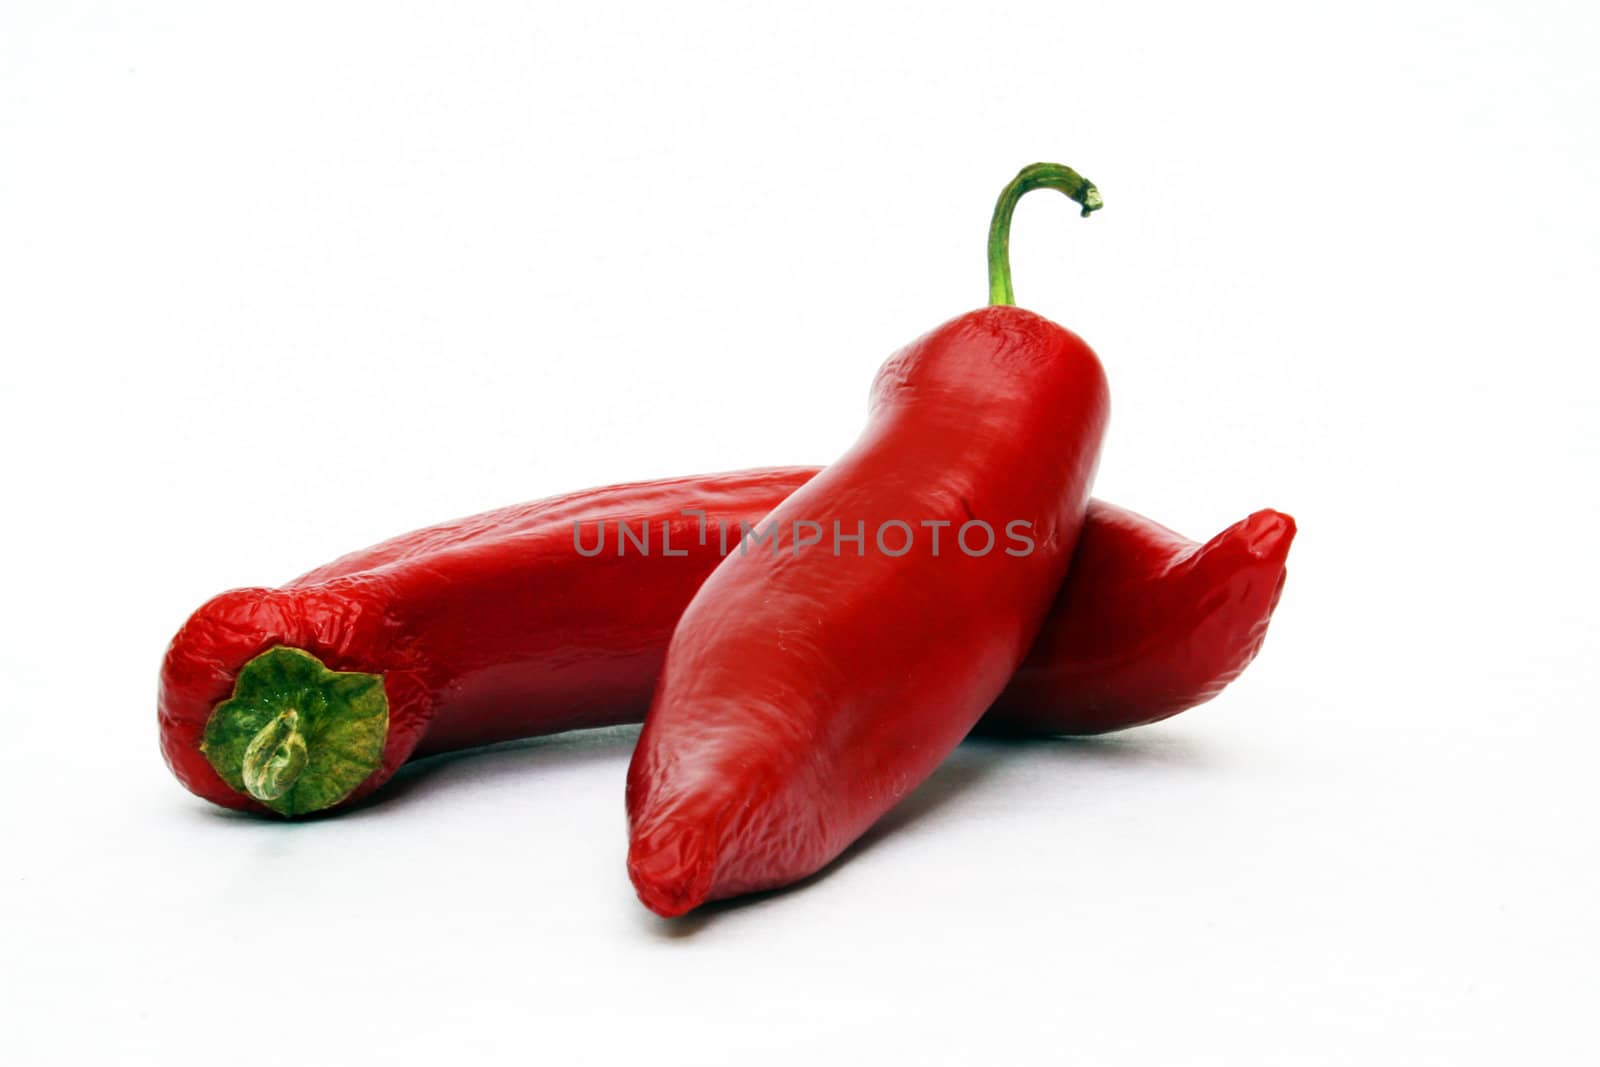 Two red chili peppers on white background